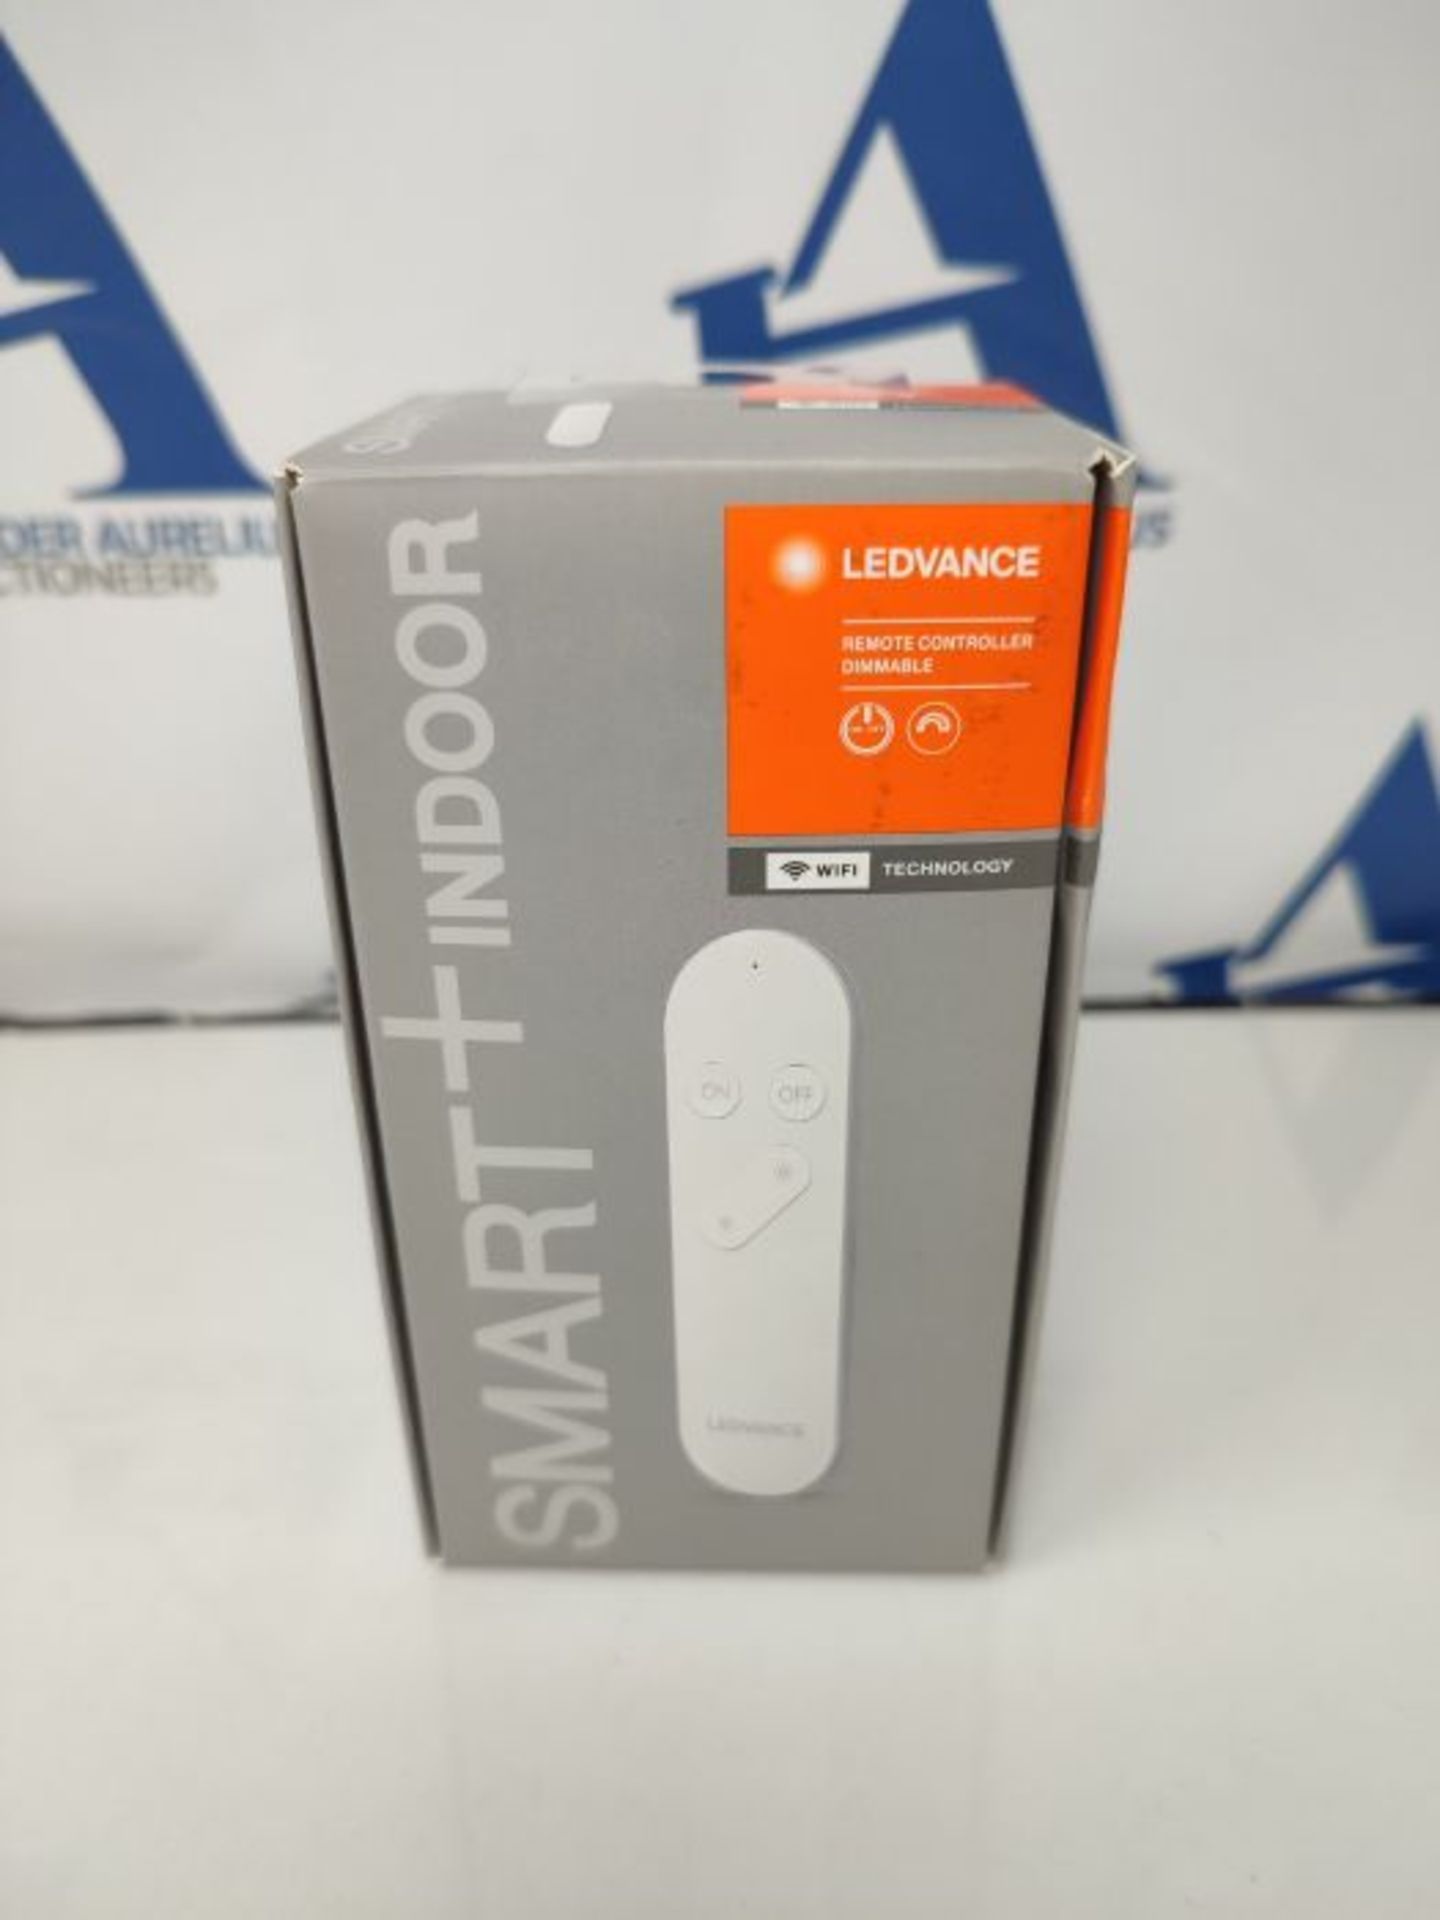 LEDVANCE SMART+ remote control with WiFi technology to control and dim compatible SMAR - Image 2 of 3